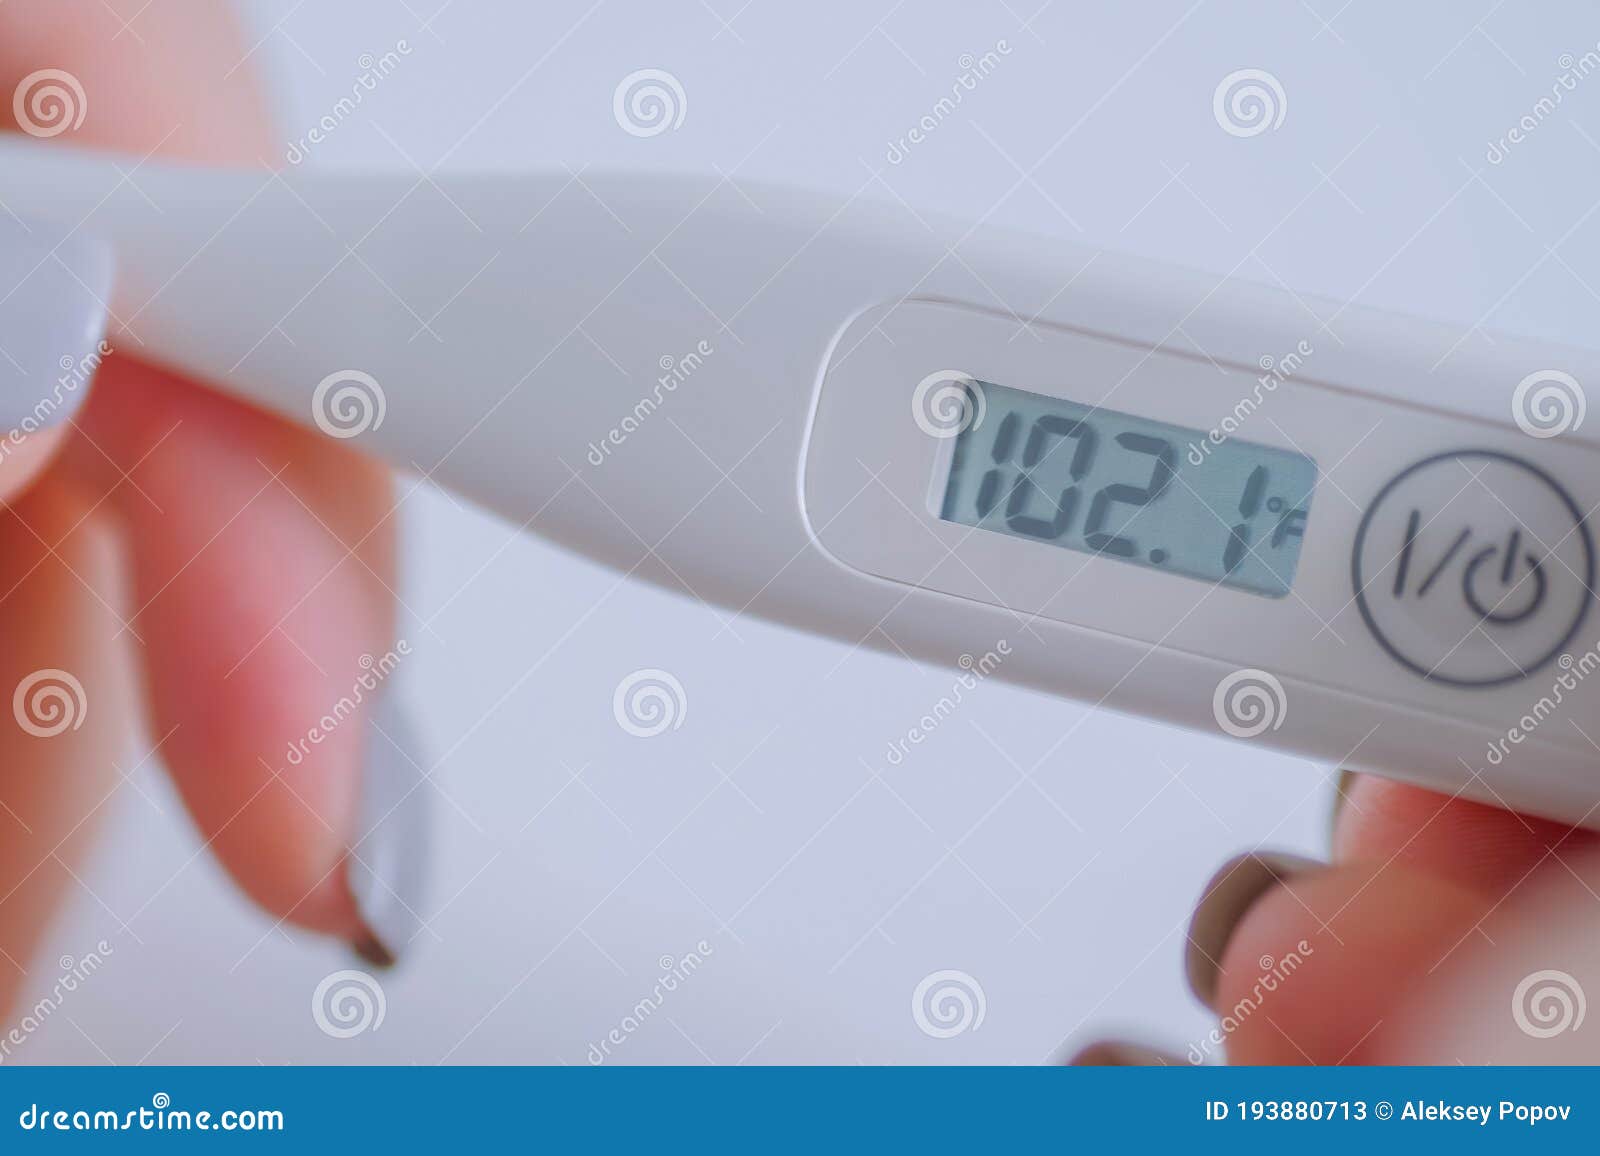 https://thumbs.dreamstime.com/z/close-up-woman-holding-digital-medical-thermometer-high-temperature-hands-white-table-selective-focus-healthcare-193880713.jpg